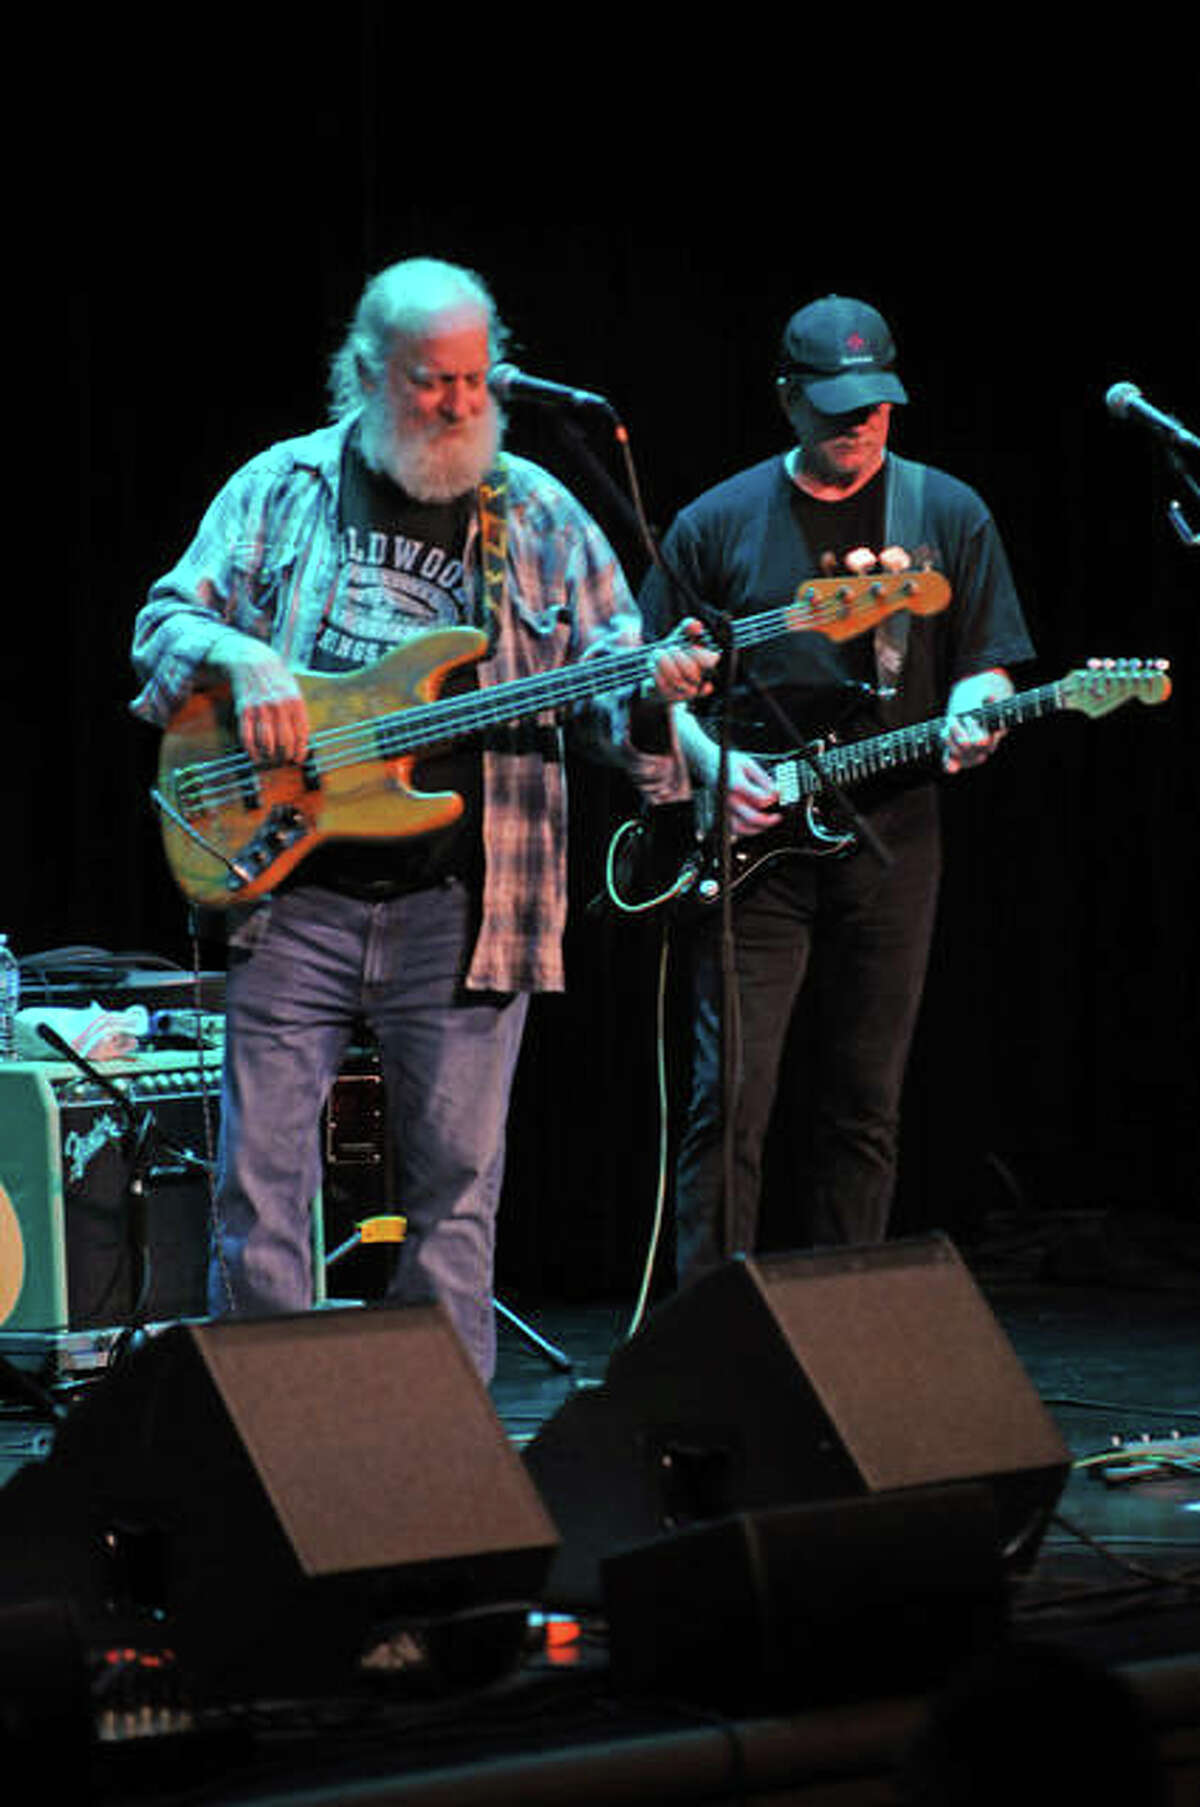 Original Ozark Mountain Daredevils’ member Michael “Supe” Granda, left, performs with the band during a Saturday matinee show at The Wildey Theatre in Edwardsville.